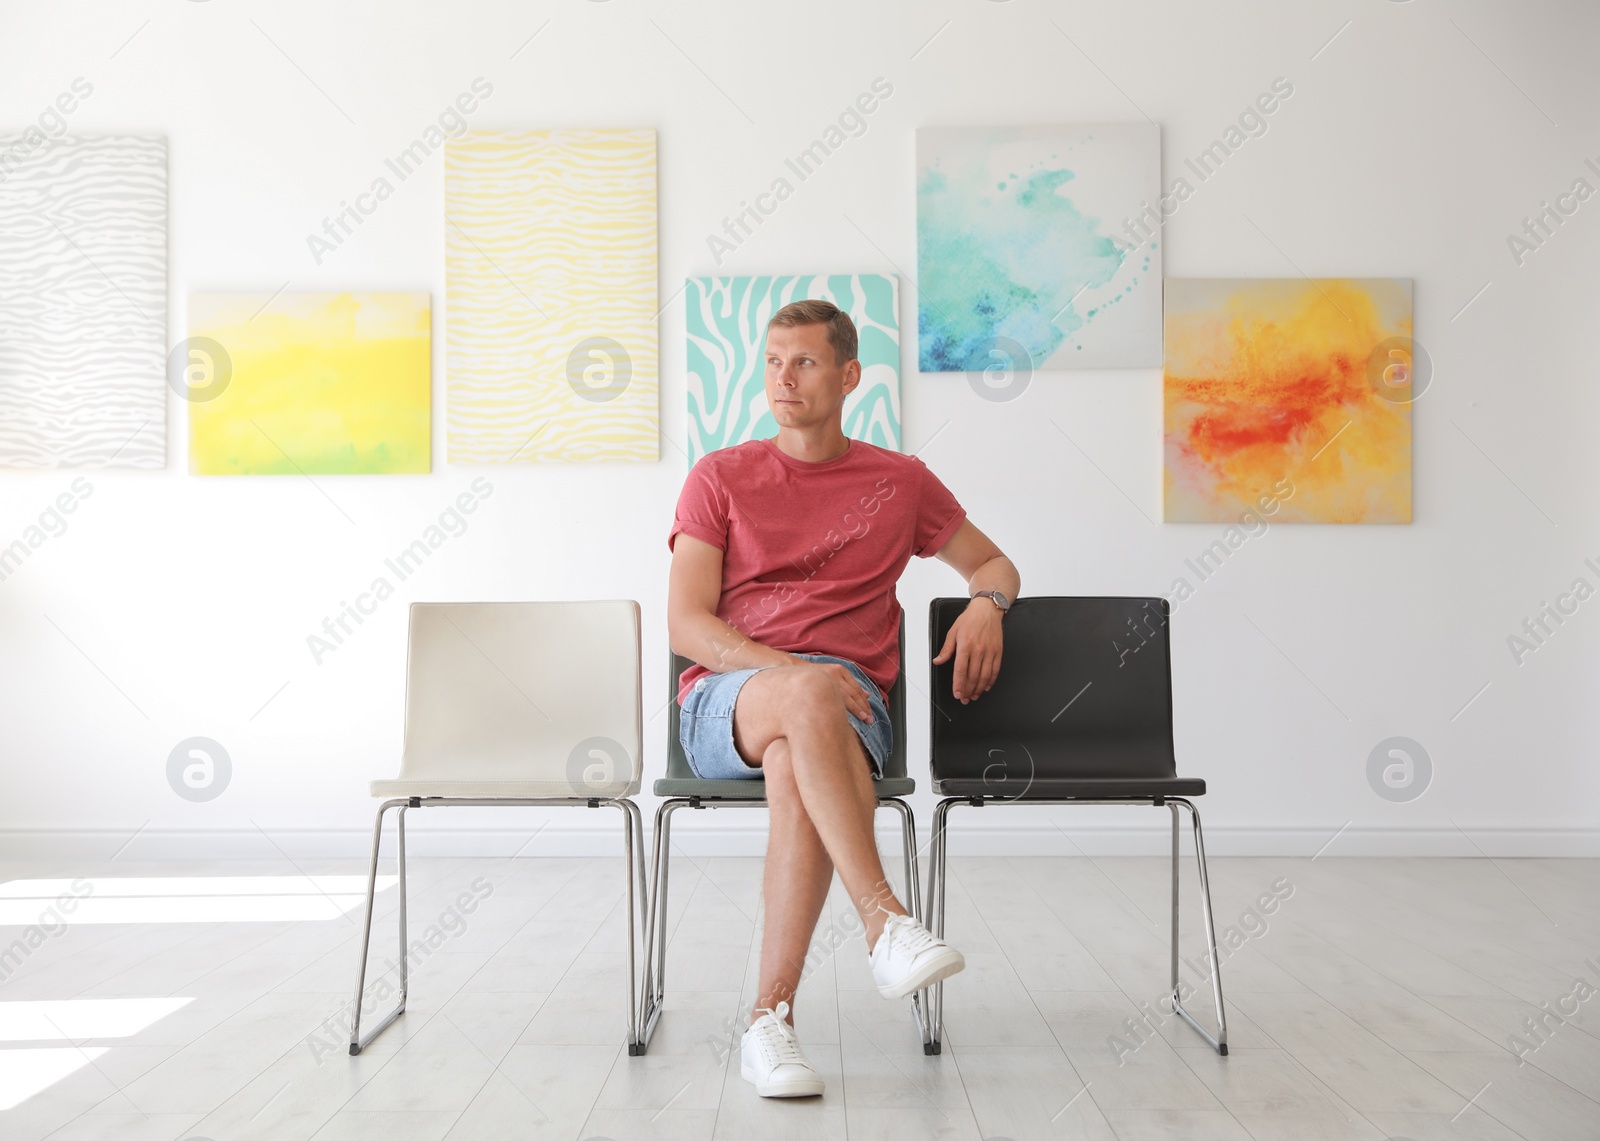 Photo of Young man sitting on chair at exhibition in art gallery